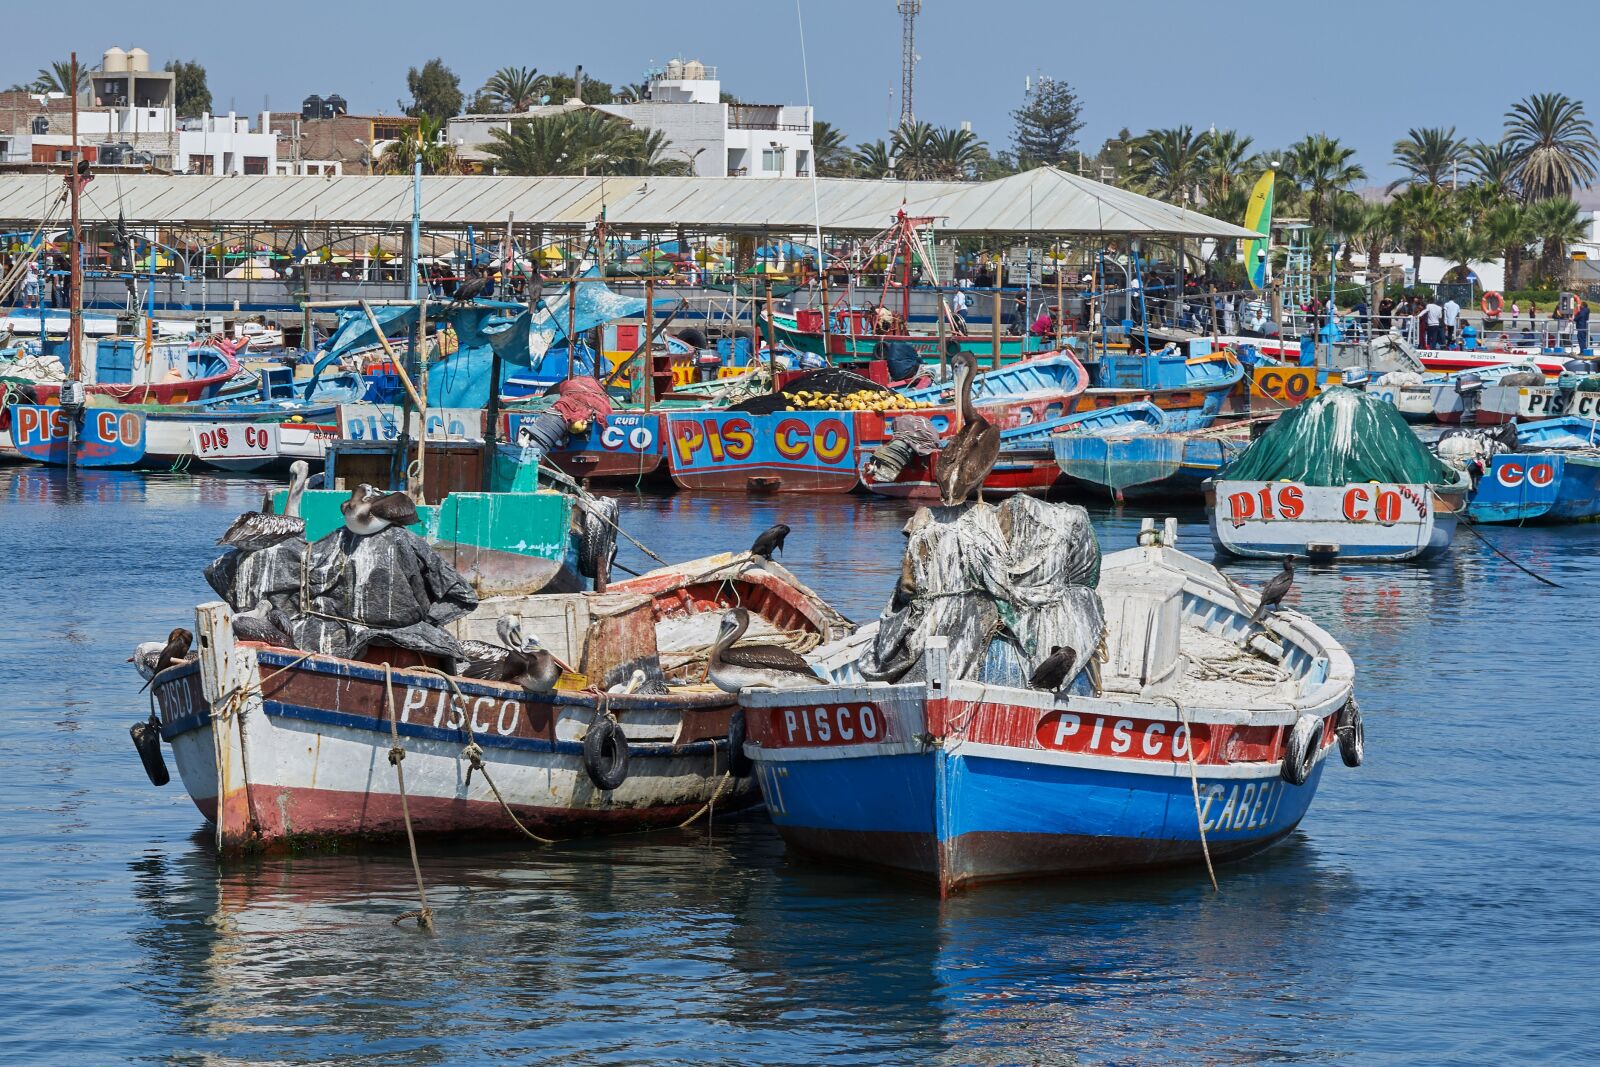 Sony a7 sample photo. Fishing boats, pisco, spring photography